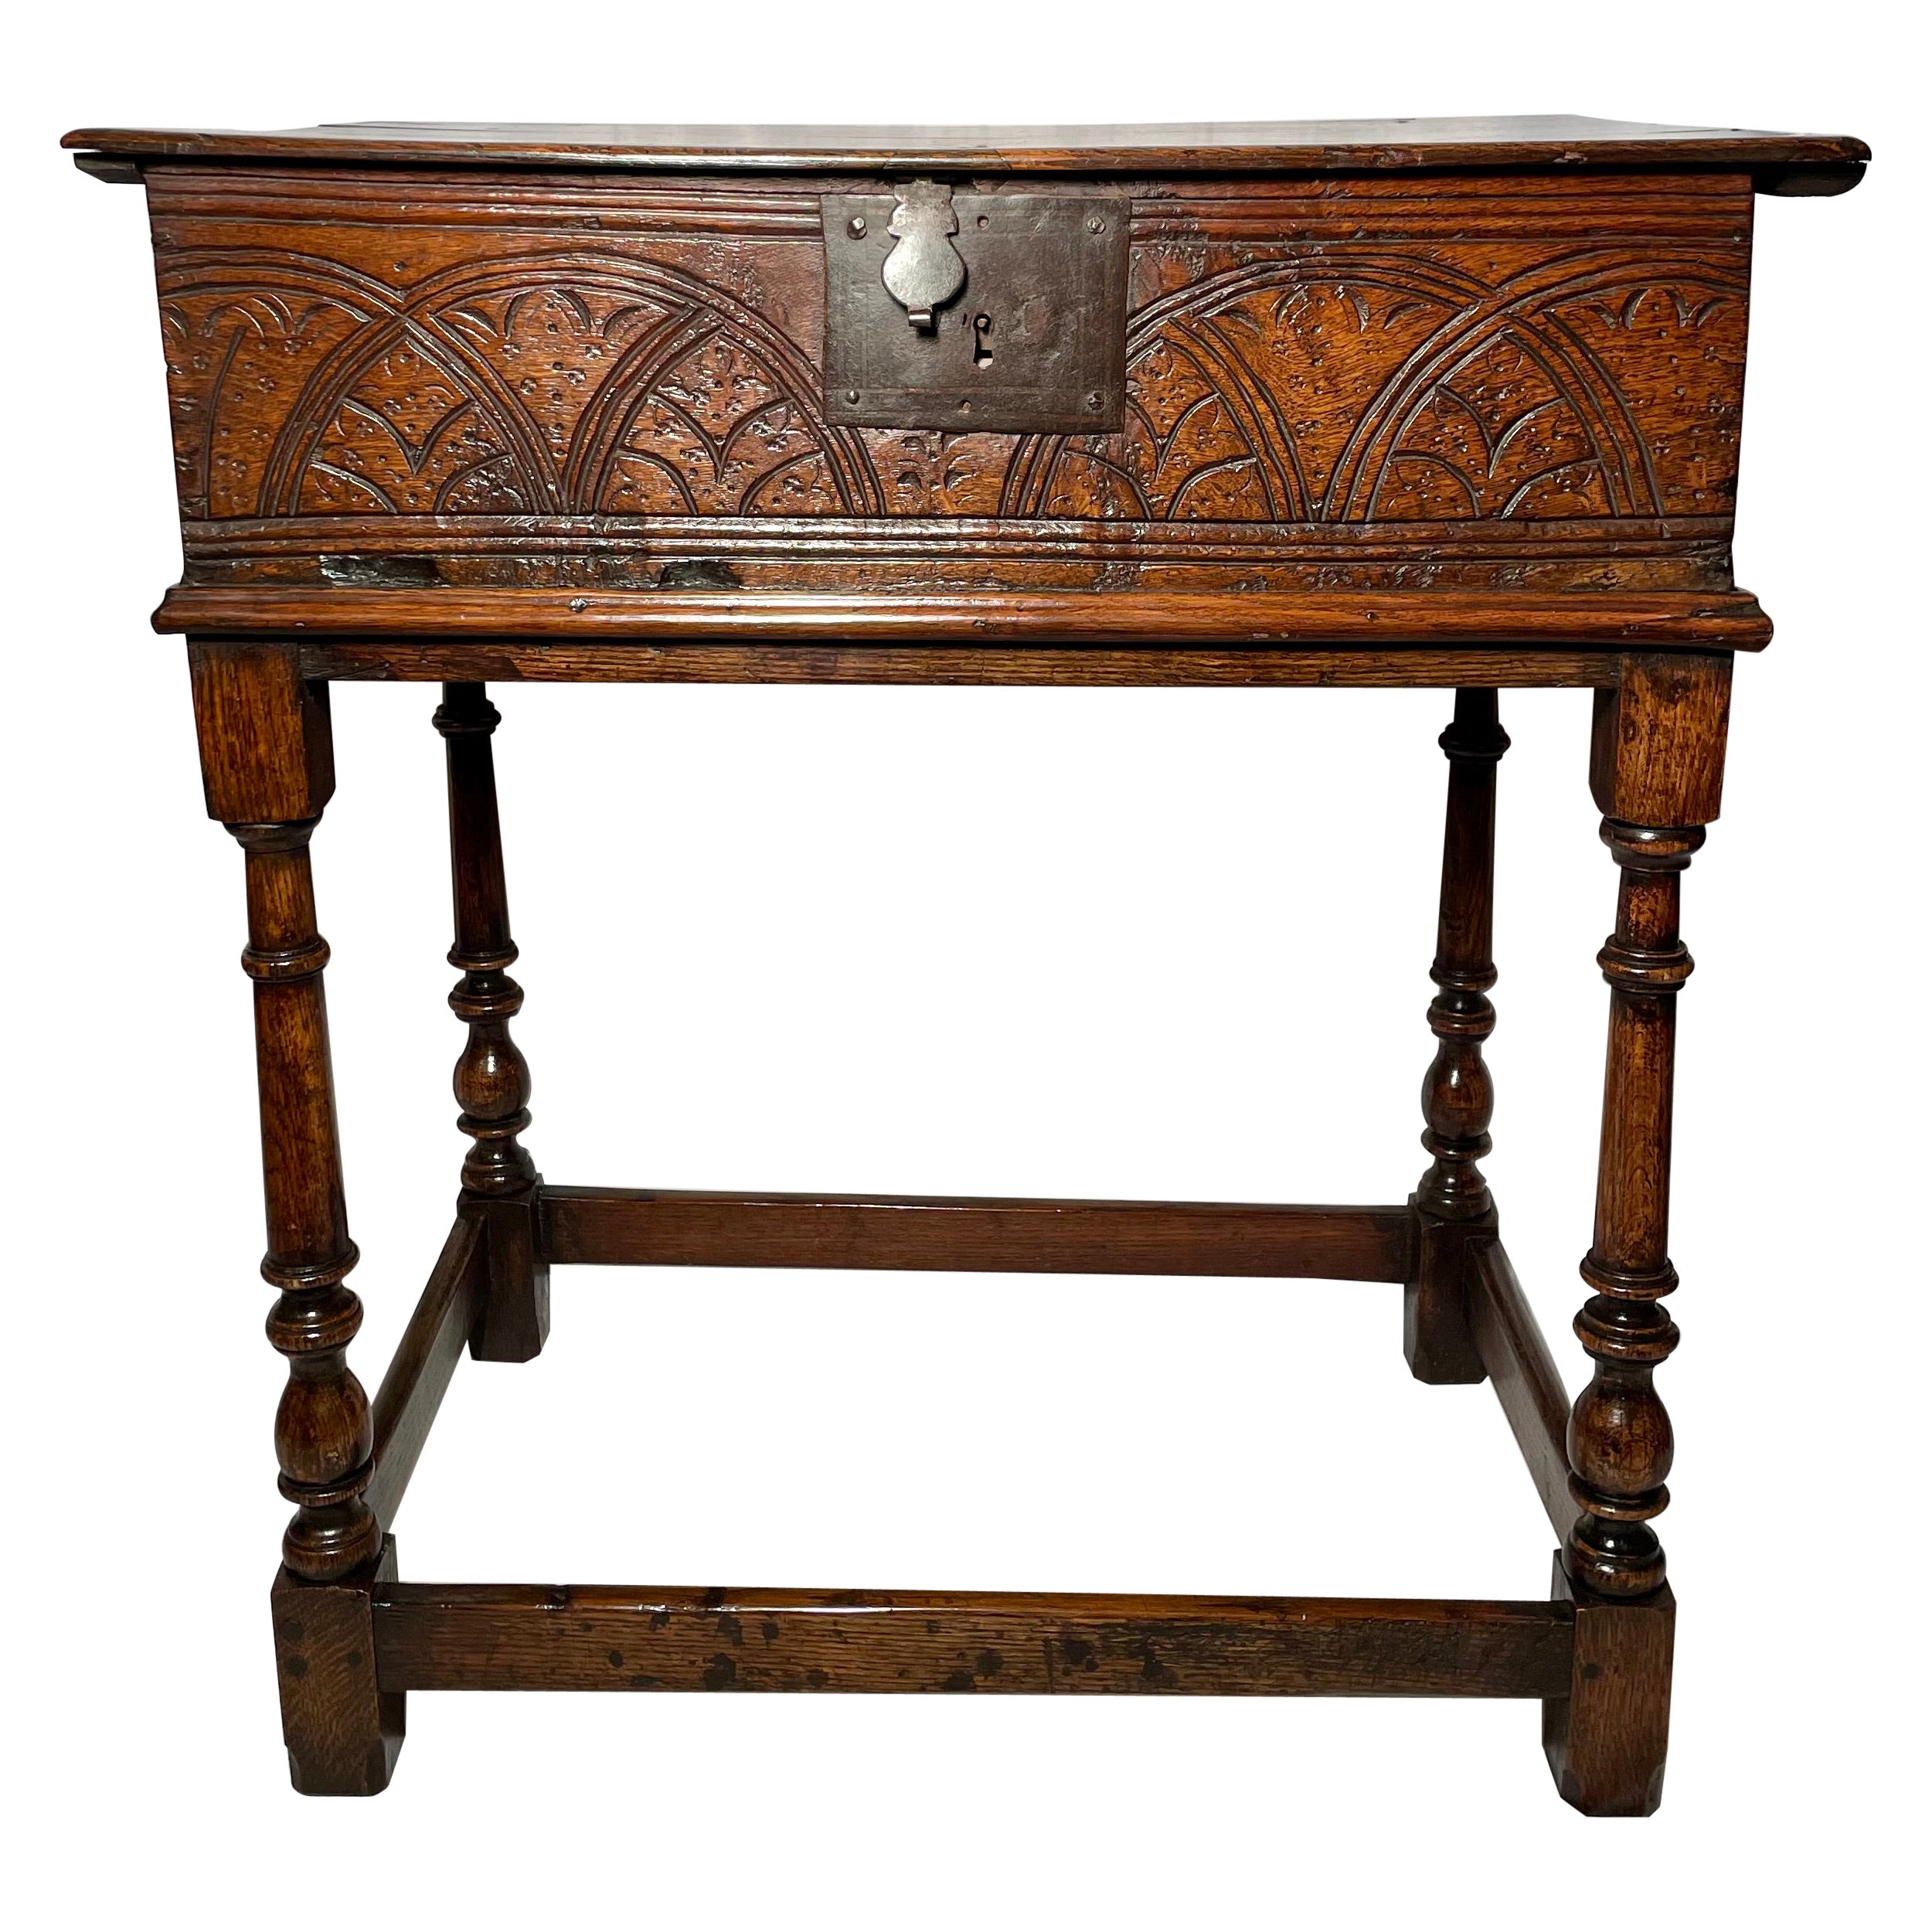 Antique English Hand-Carved Oak Table with Interior Compartment, Circa 1840